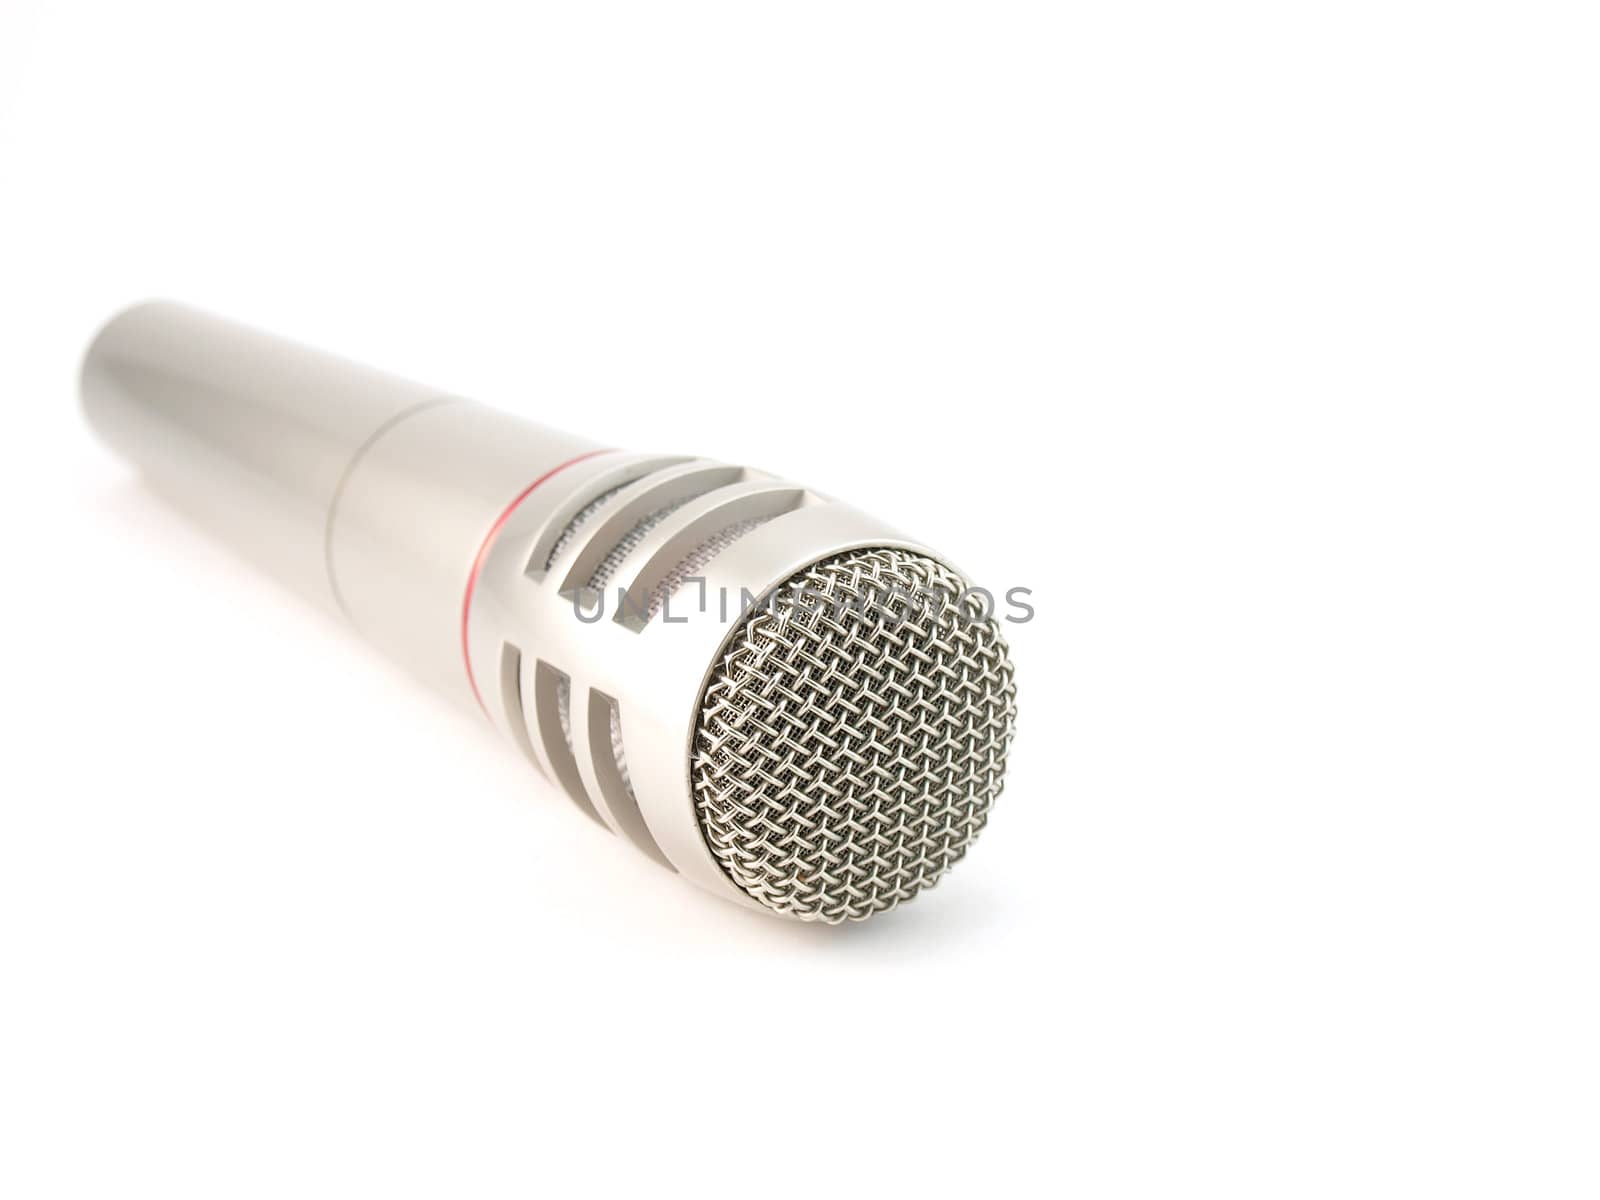 Microphone over white. Shallow DOF.